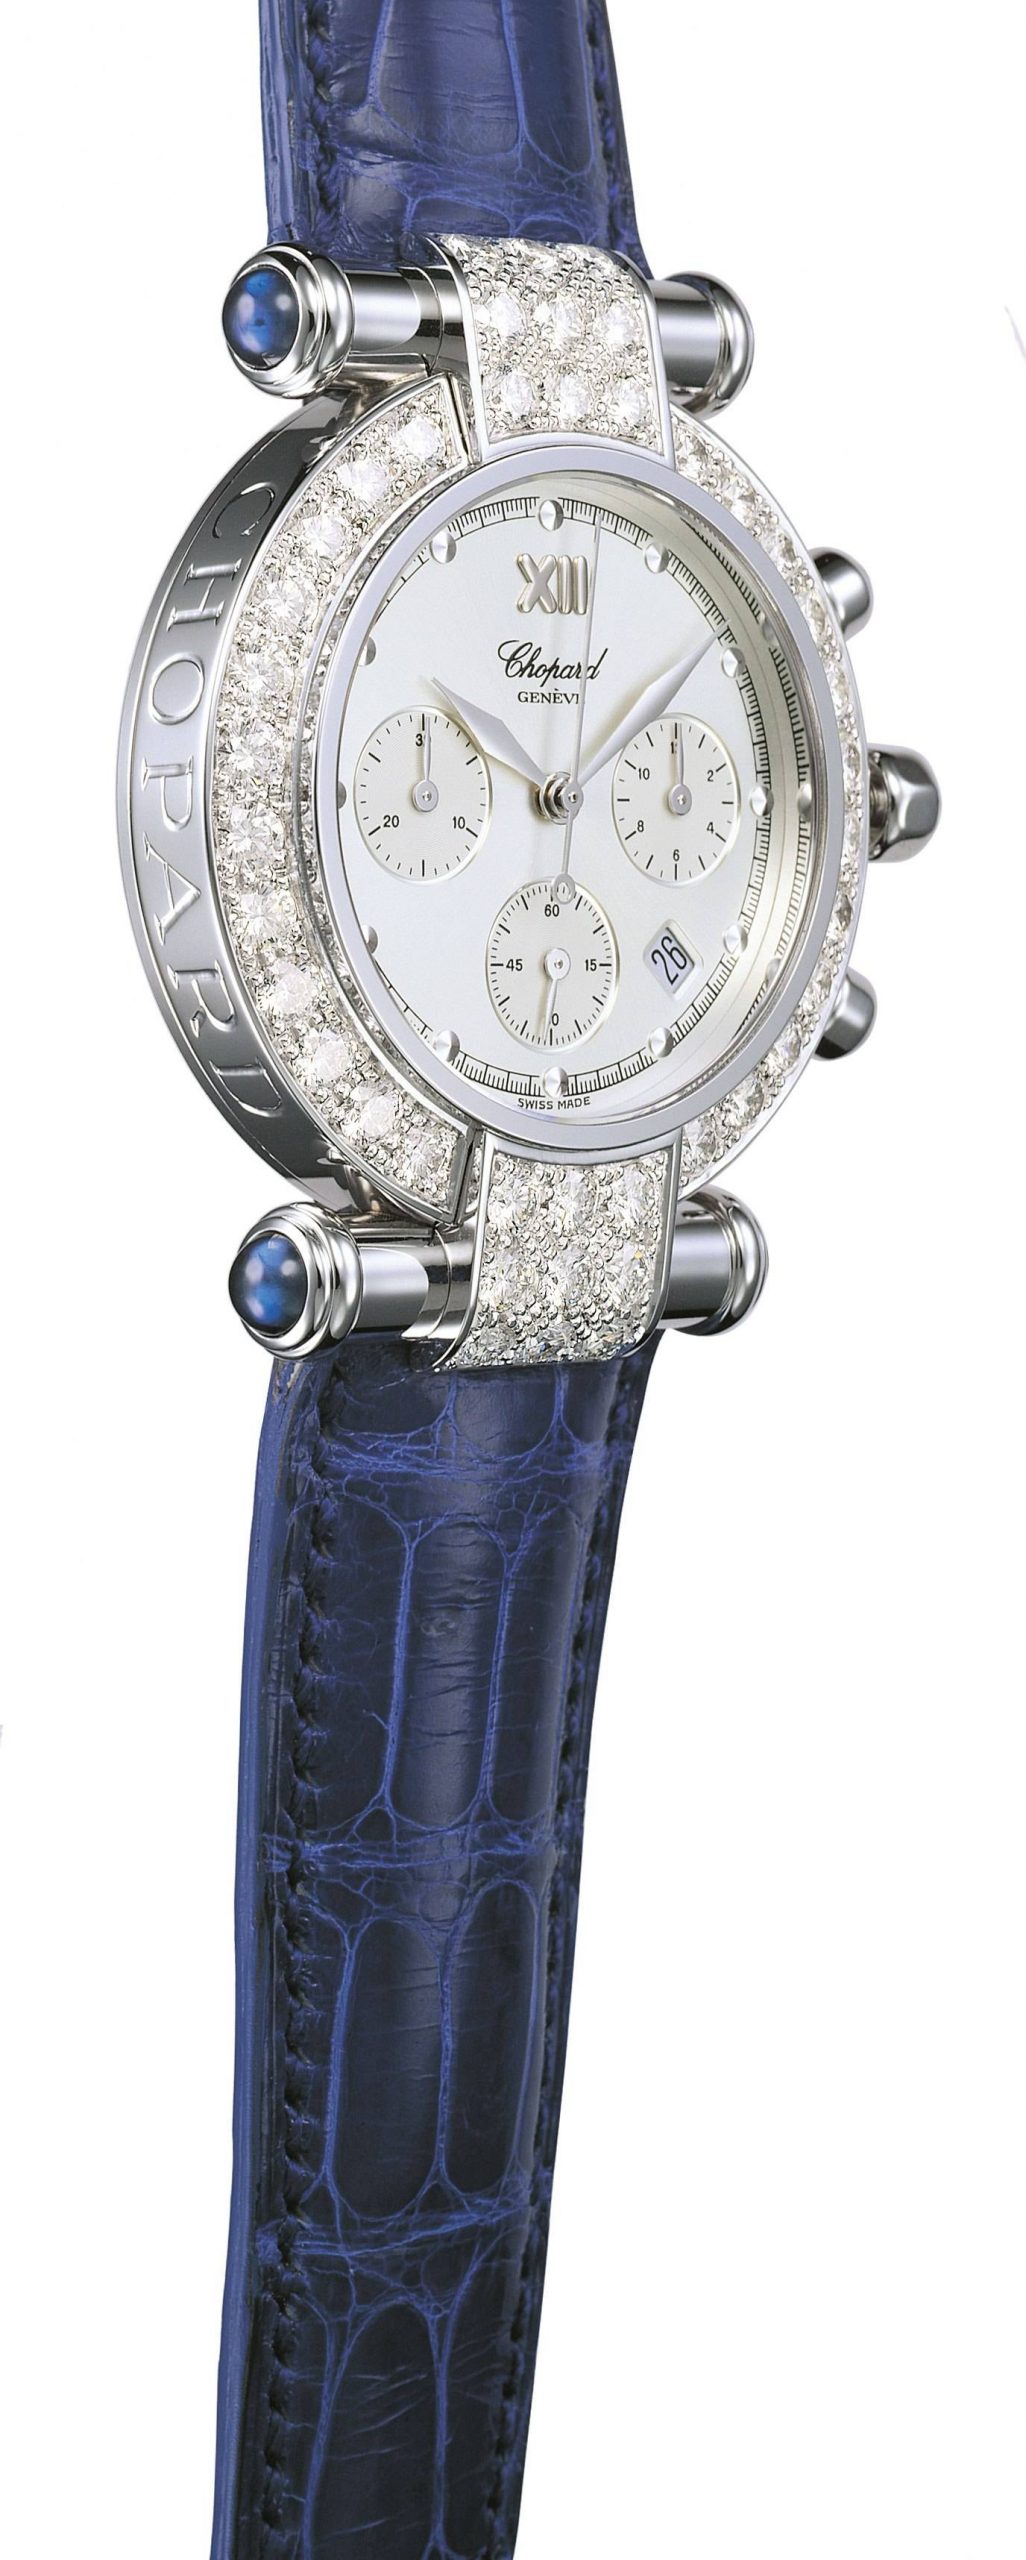 Throwback Thursday: Chopard Imperiale